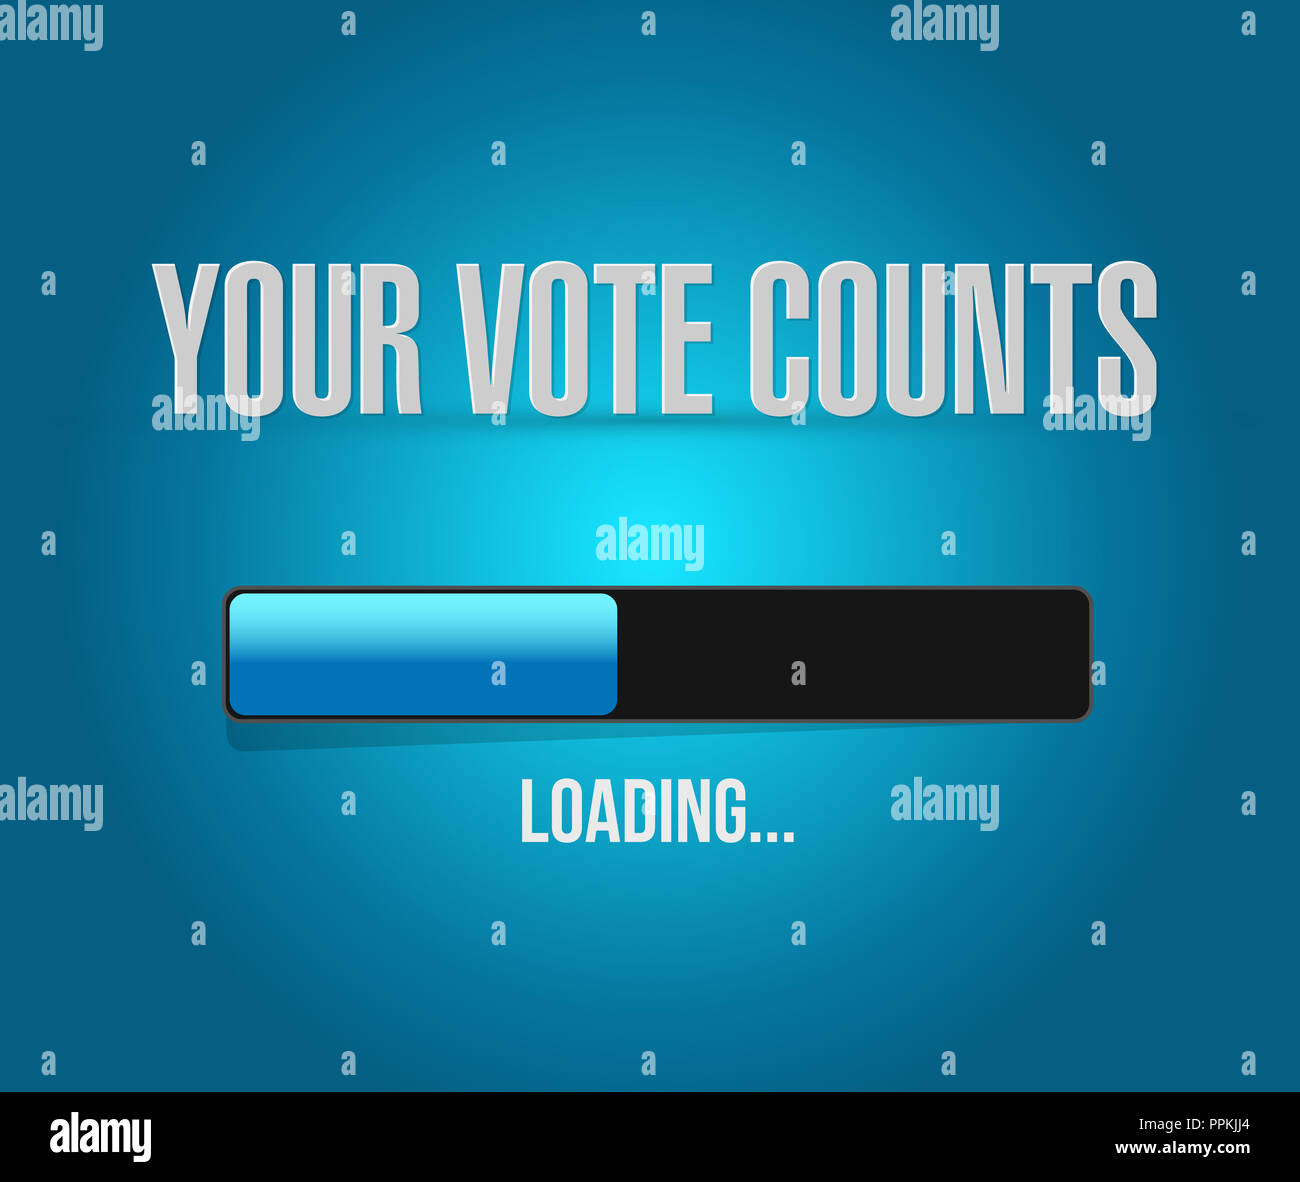 Your vote counts loading bar message concept illustration isolated over a blue background Stock Photo